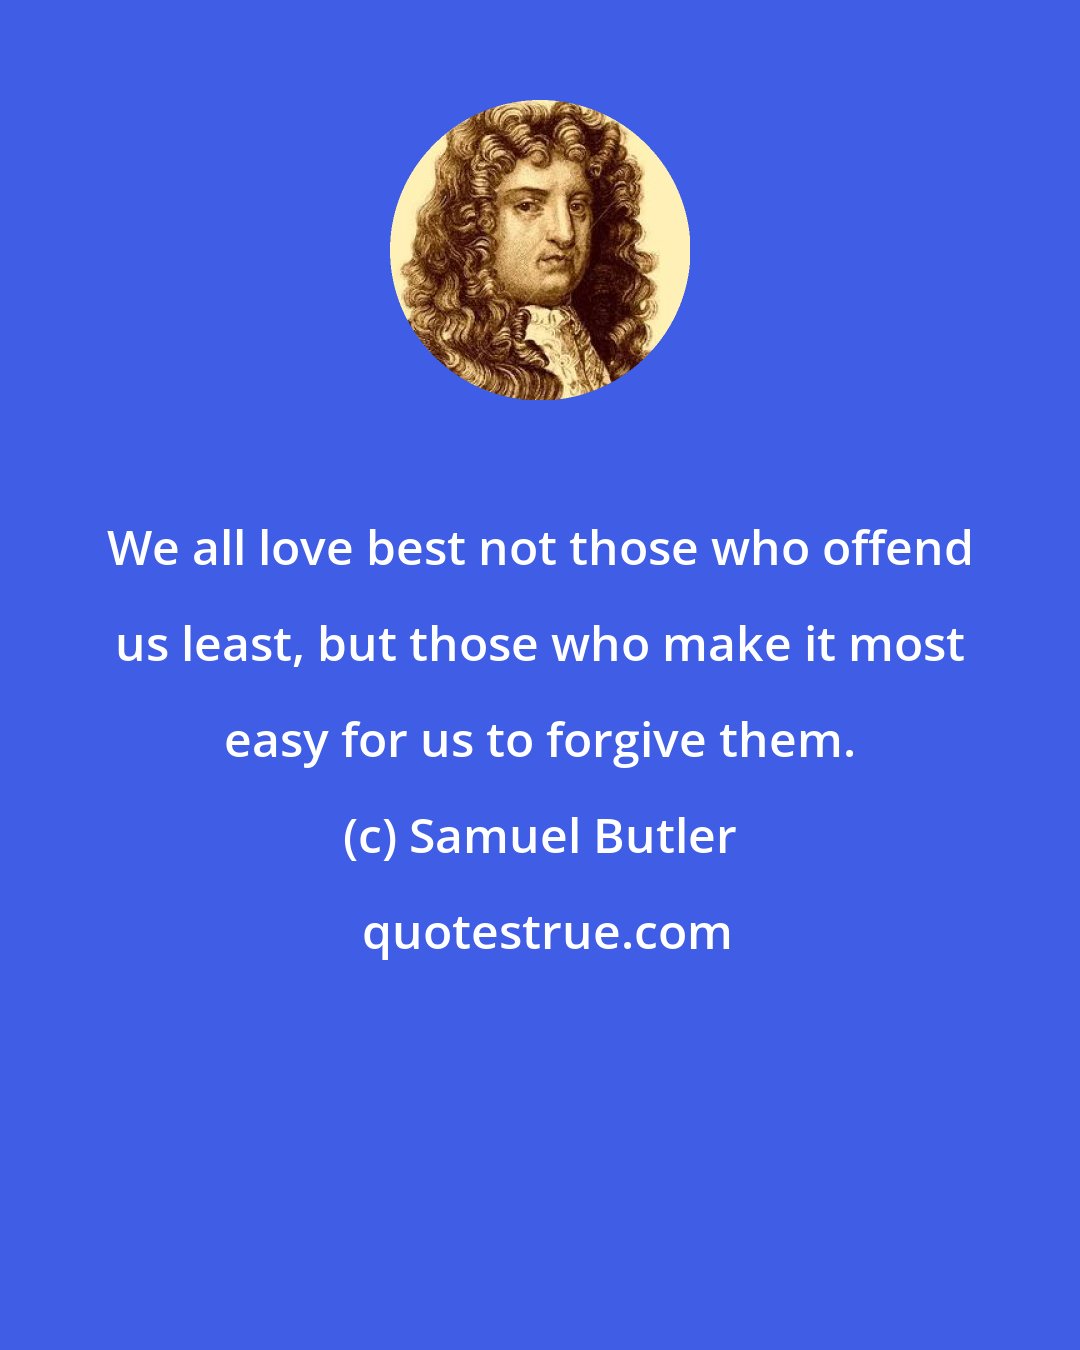 Samuel Butler: We all love best not those who offend us least, but those who make it most easy for us to forgive them.